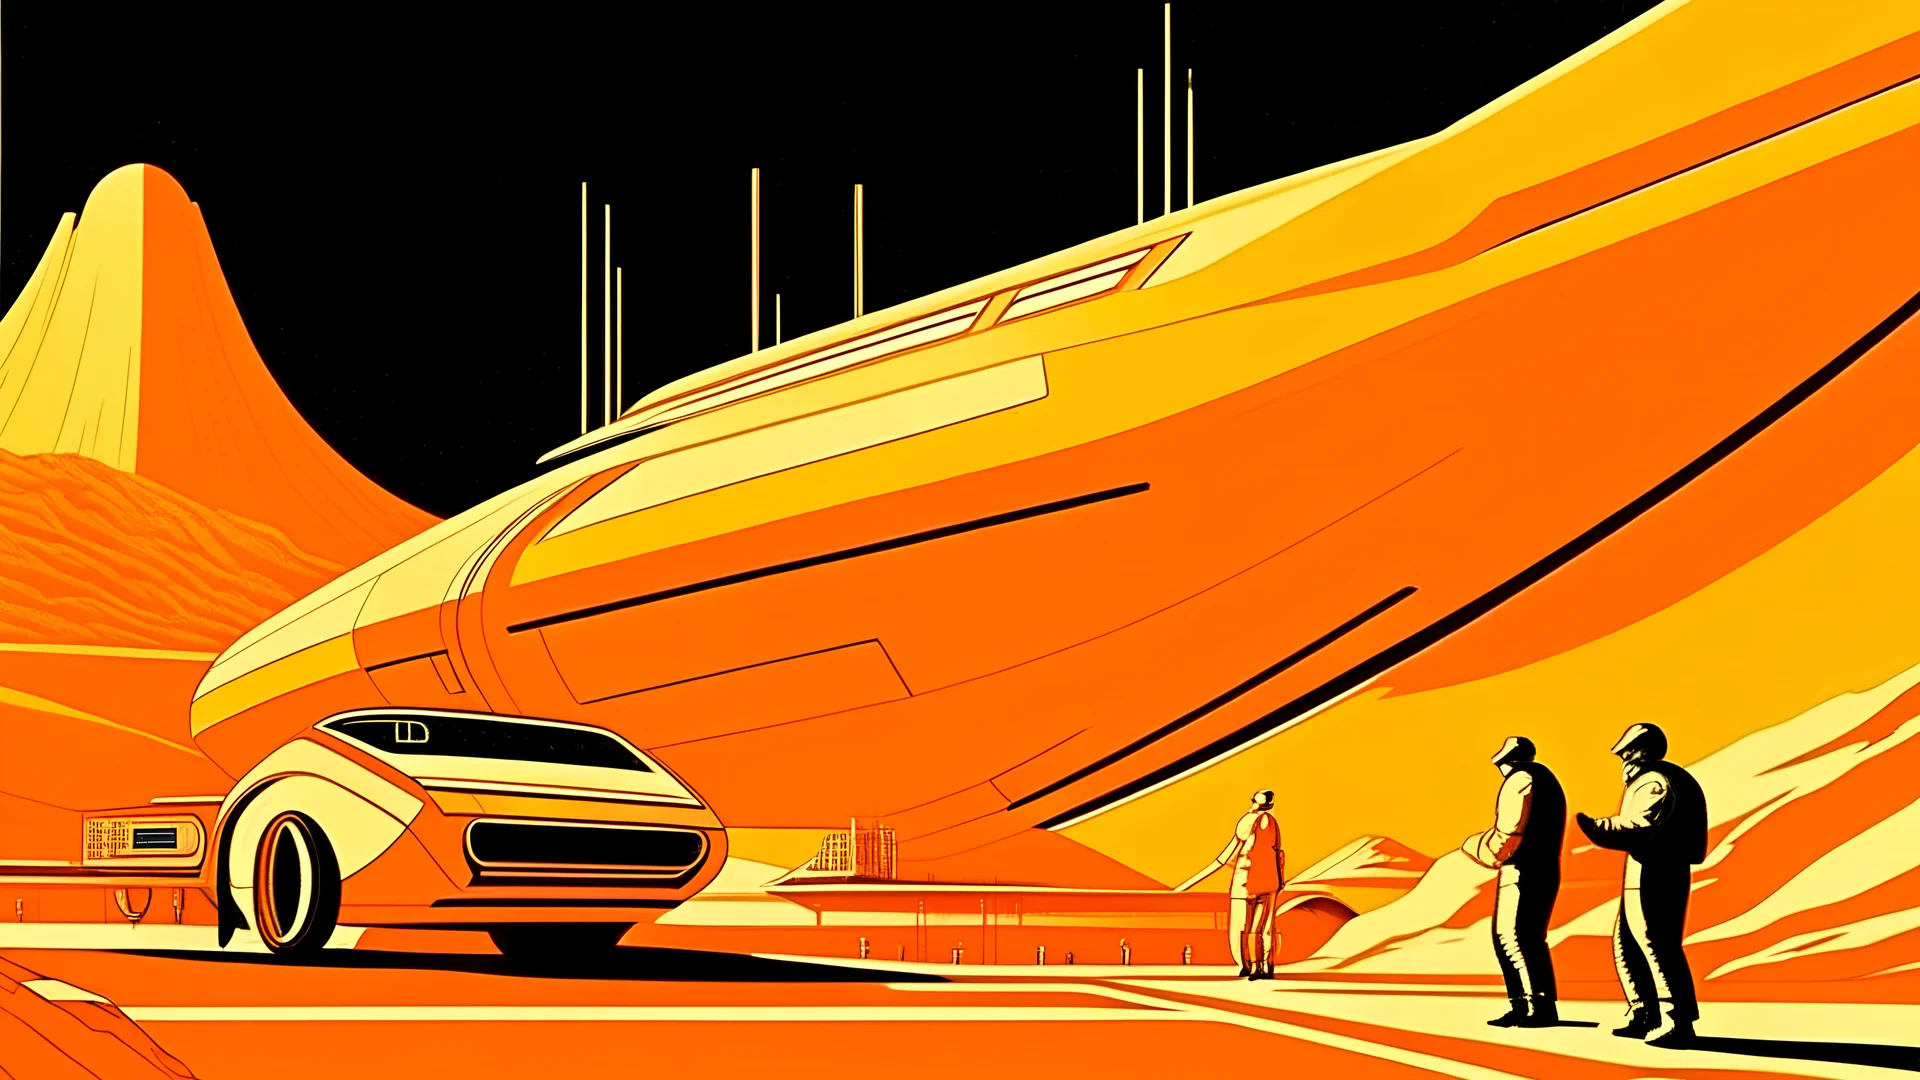 retro futurism, syd mead style, space launch, detailed